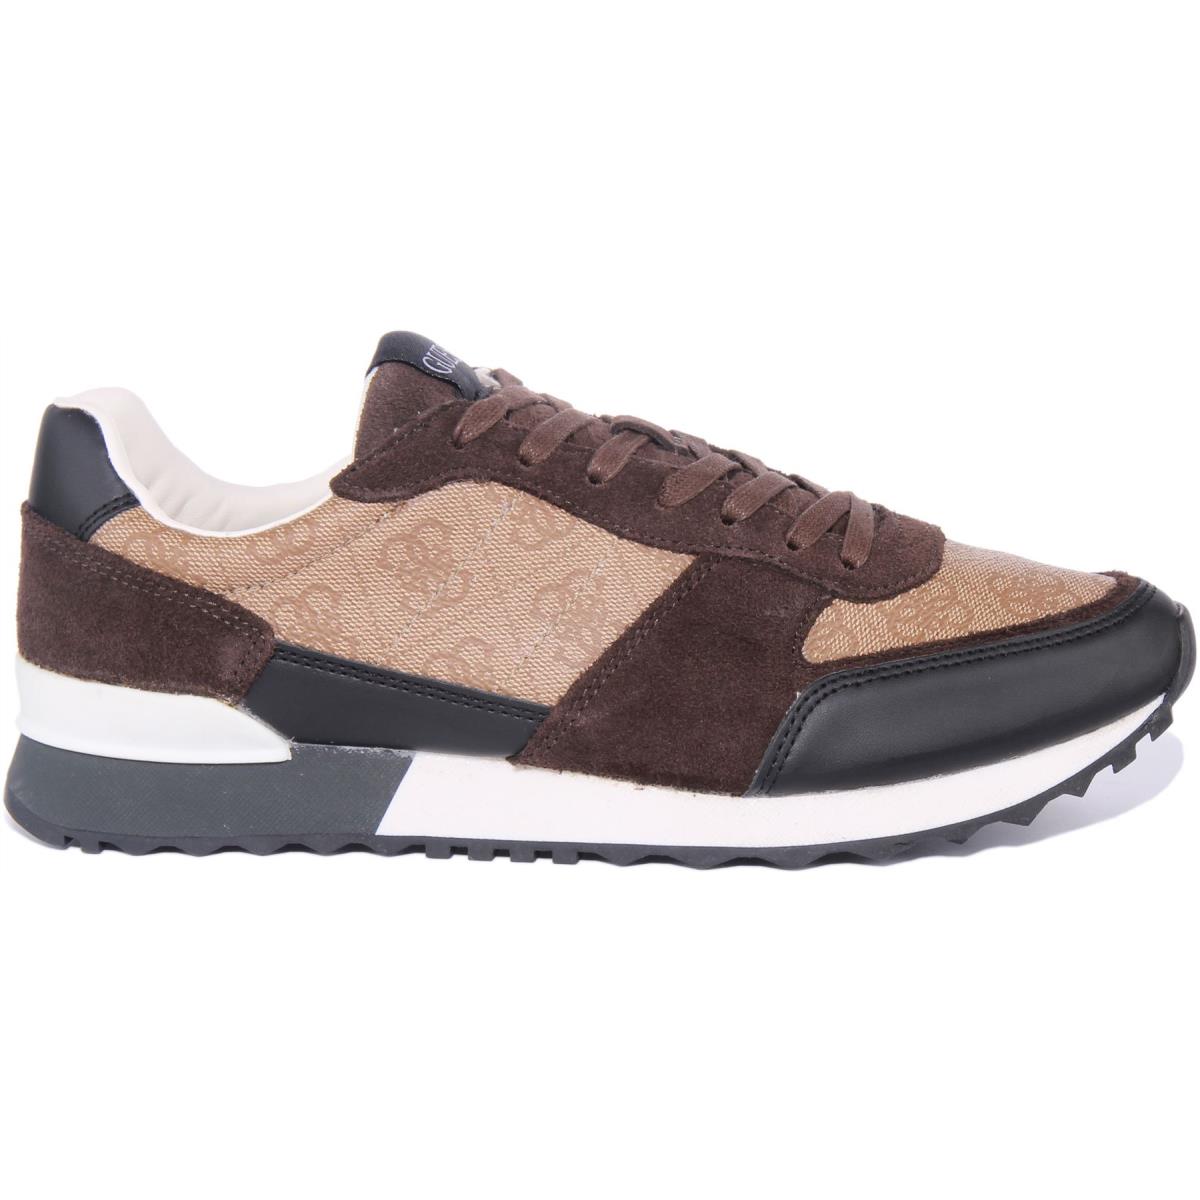 Guess Fm6Pdvfal12 Mens Lace Up Runner Inspired Sneakers In Brown Size US 7 - 13